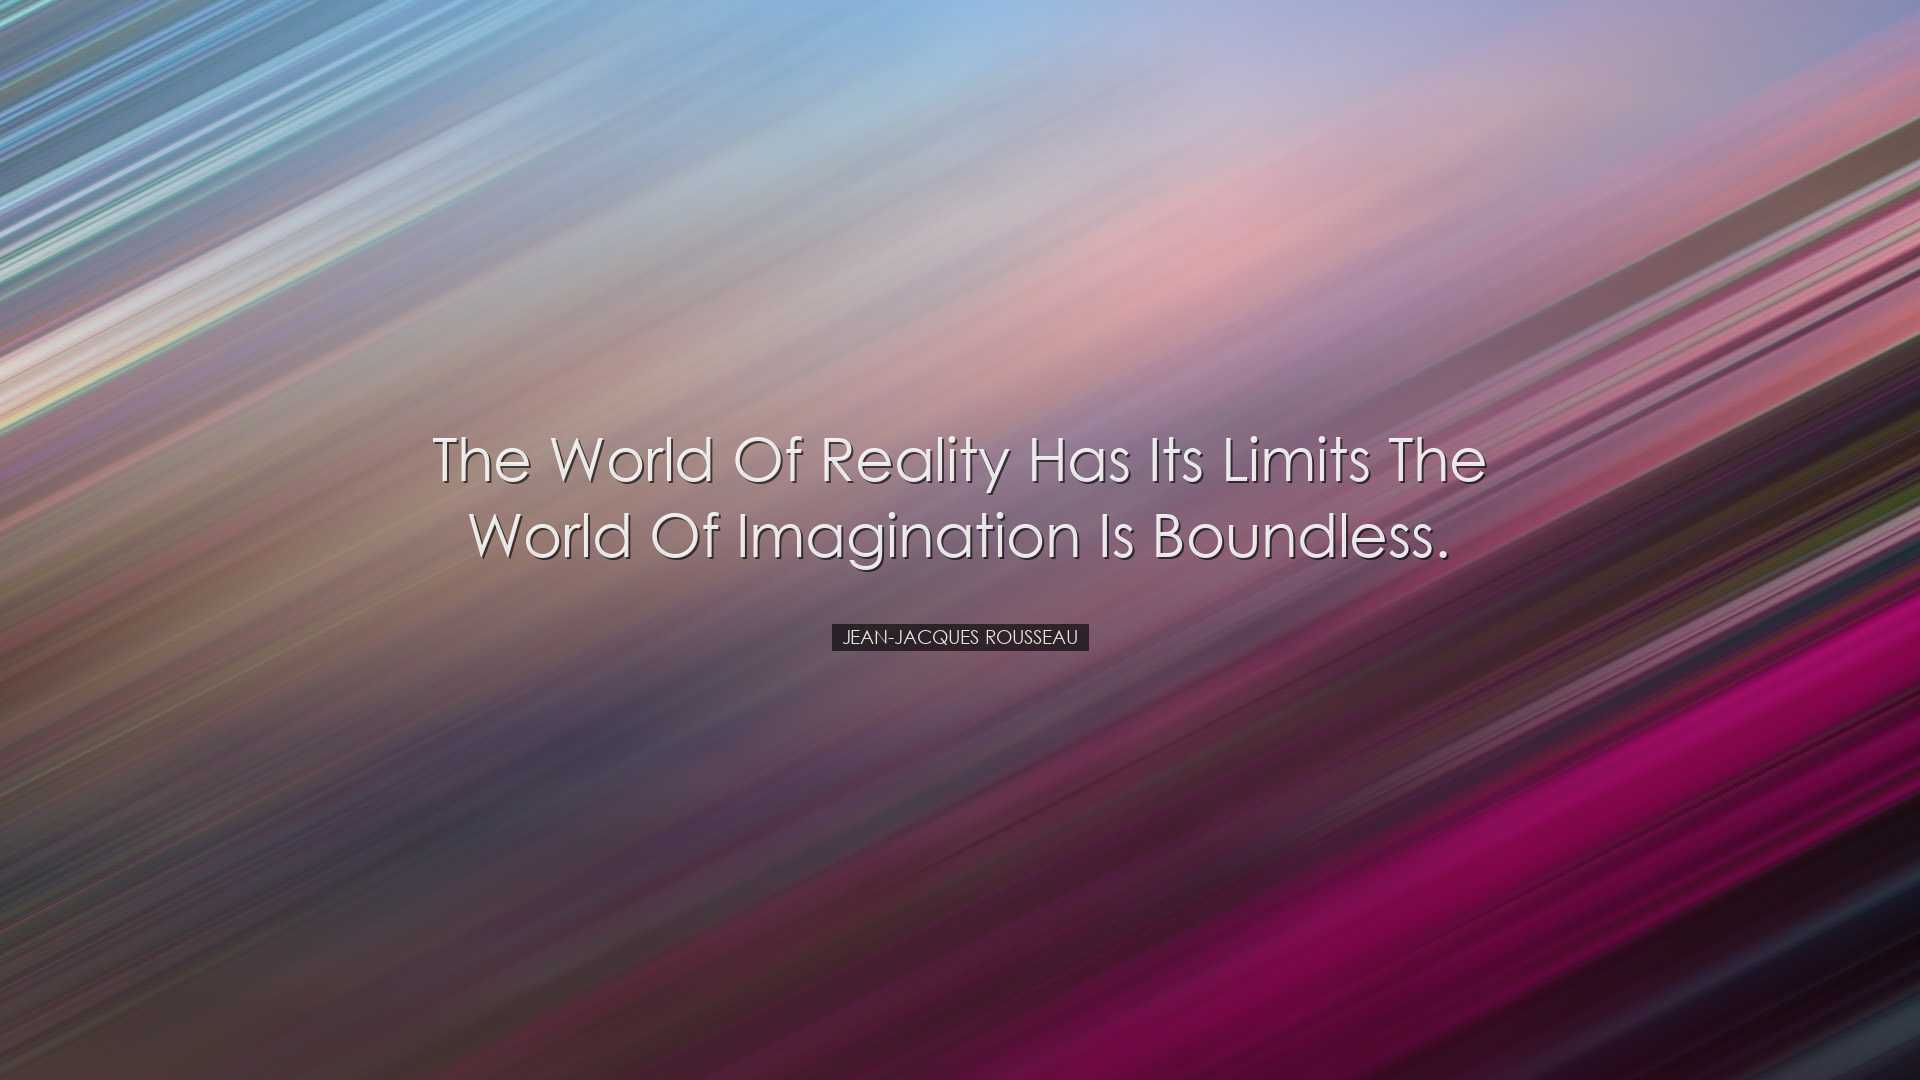 The world of reality has its limits the world of imagination is bo